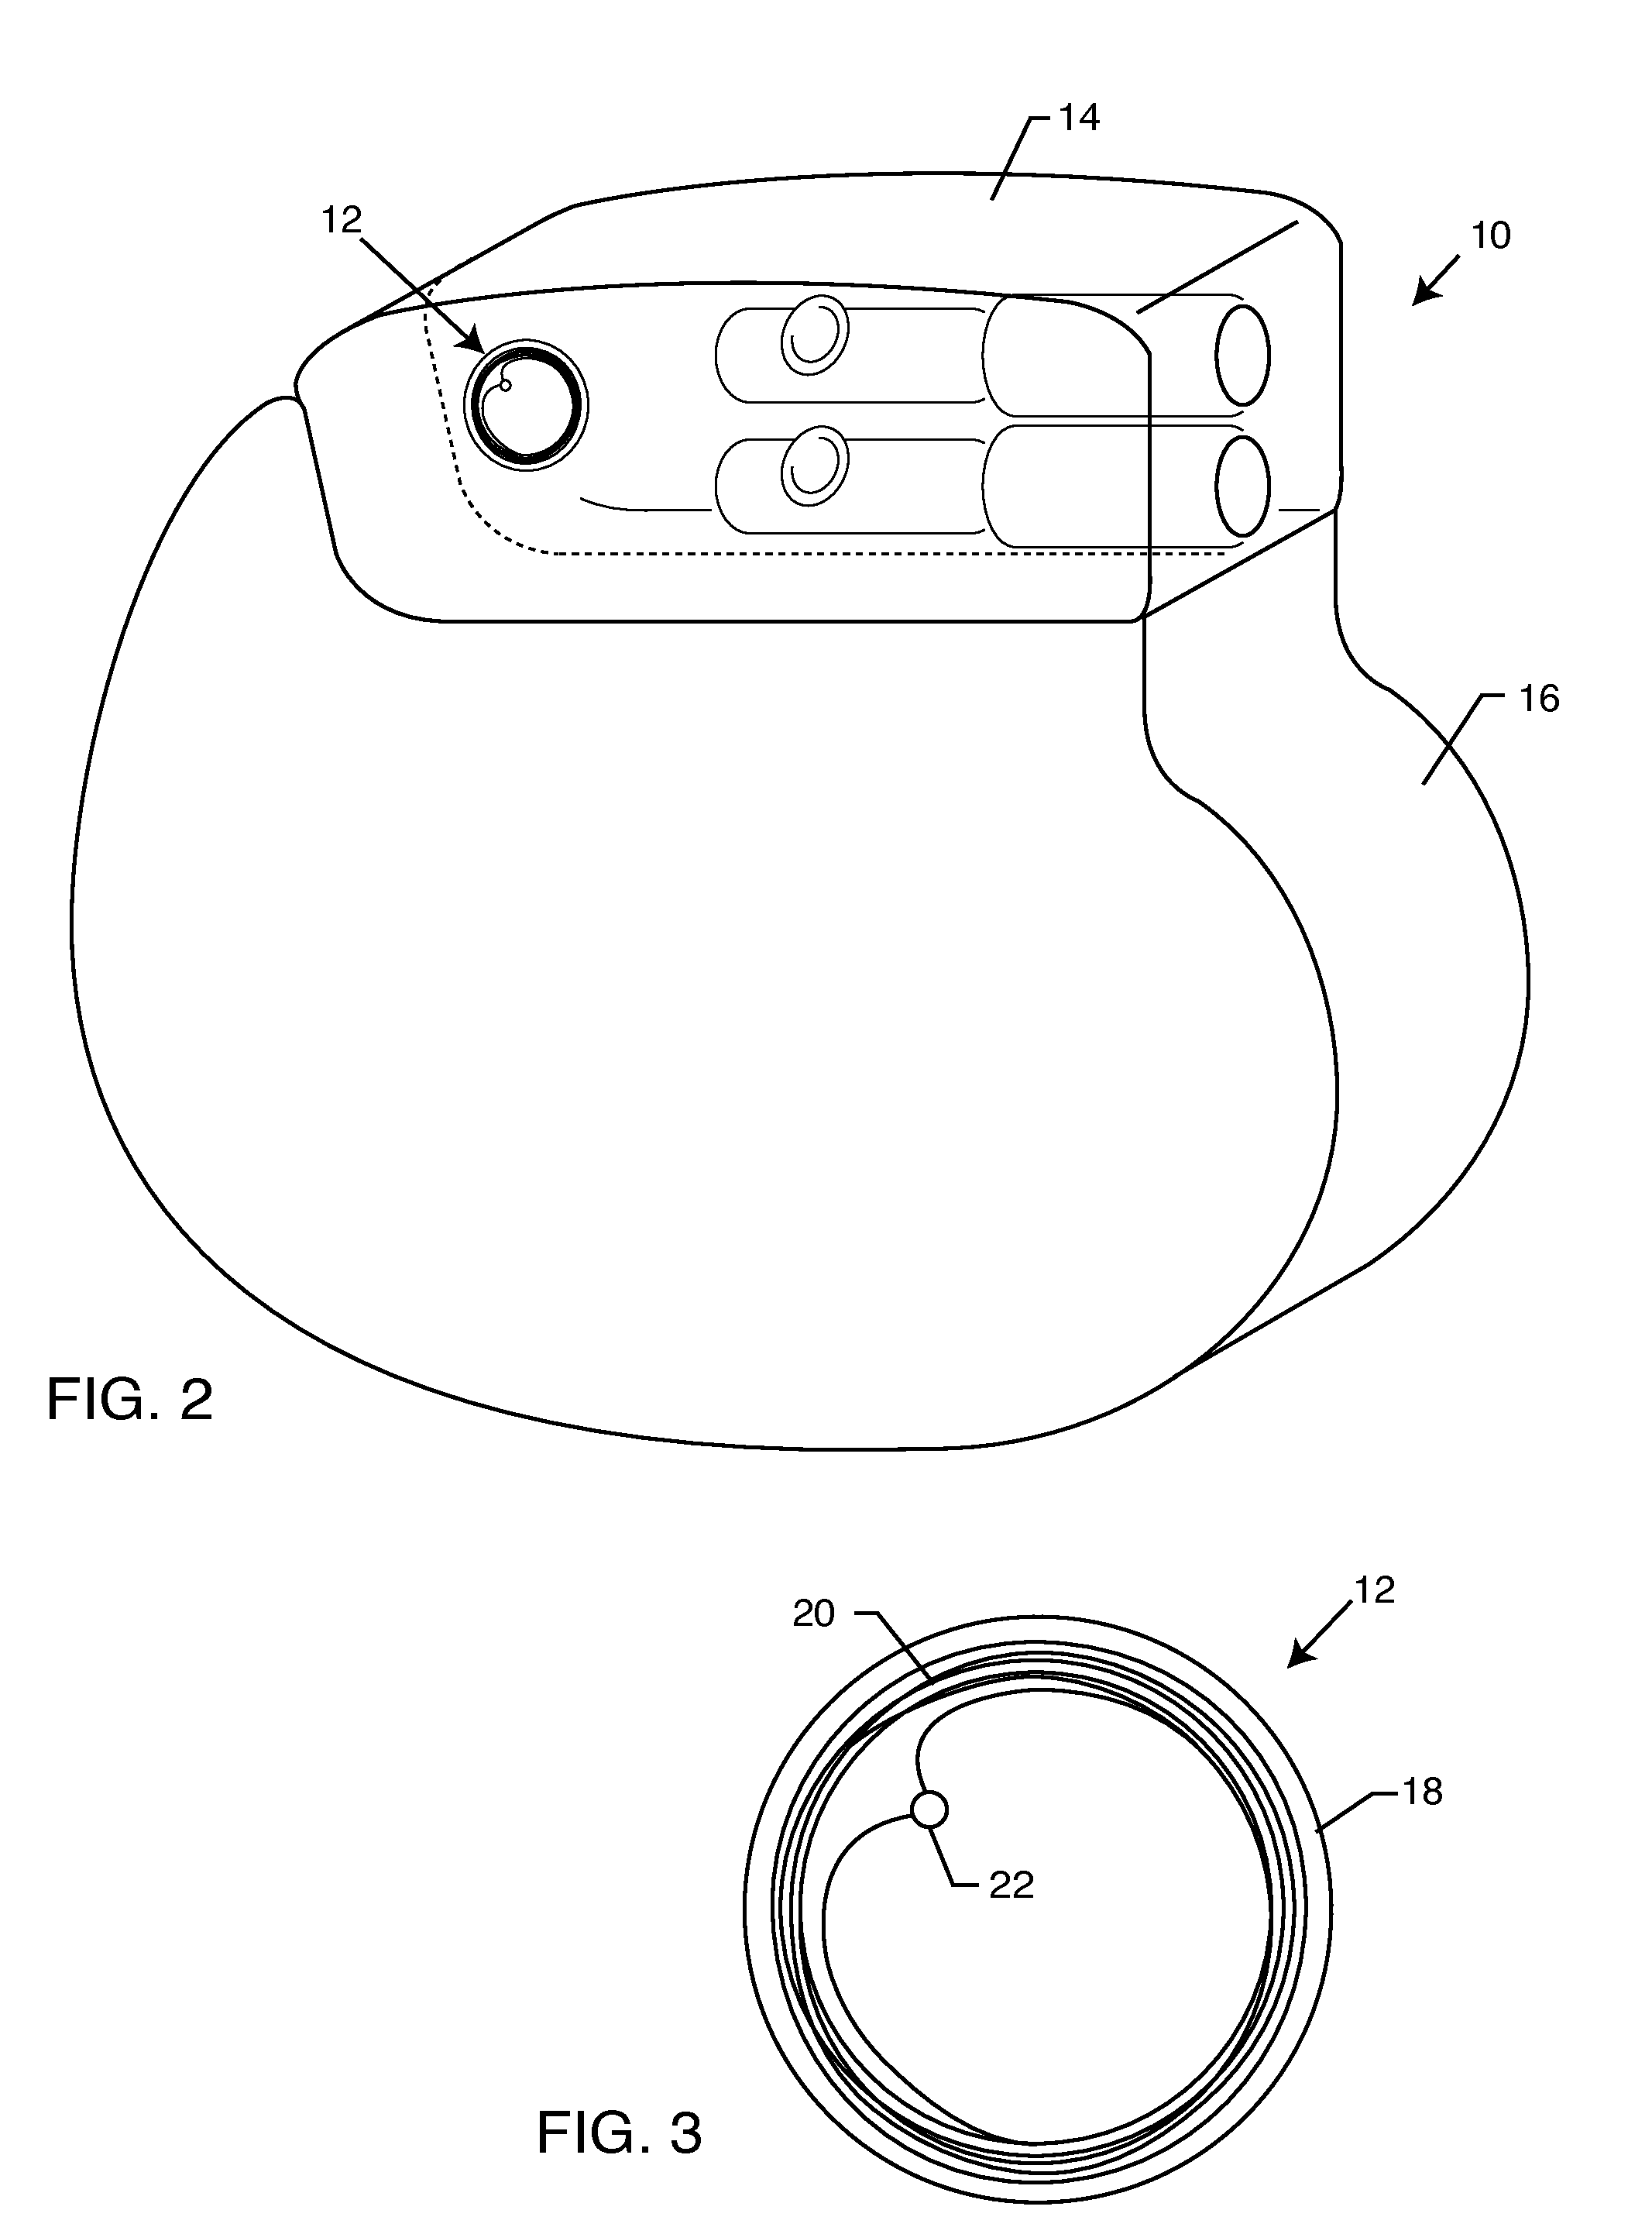 Process for transferring product information utilizing barcode reader into permanent memory for an implanted medical device